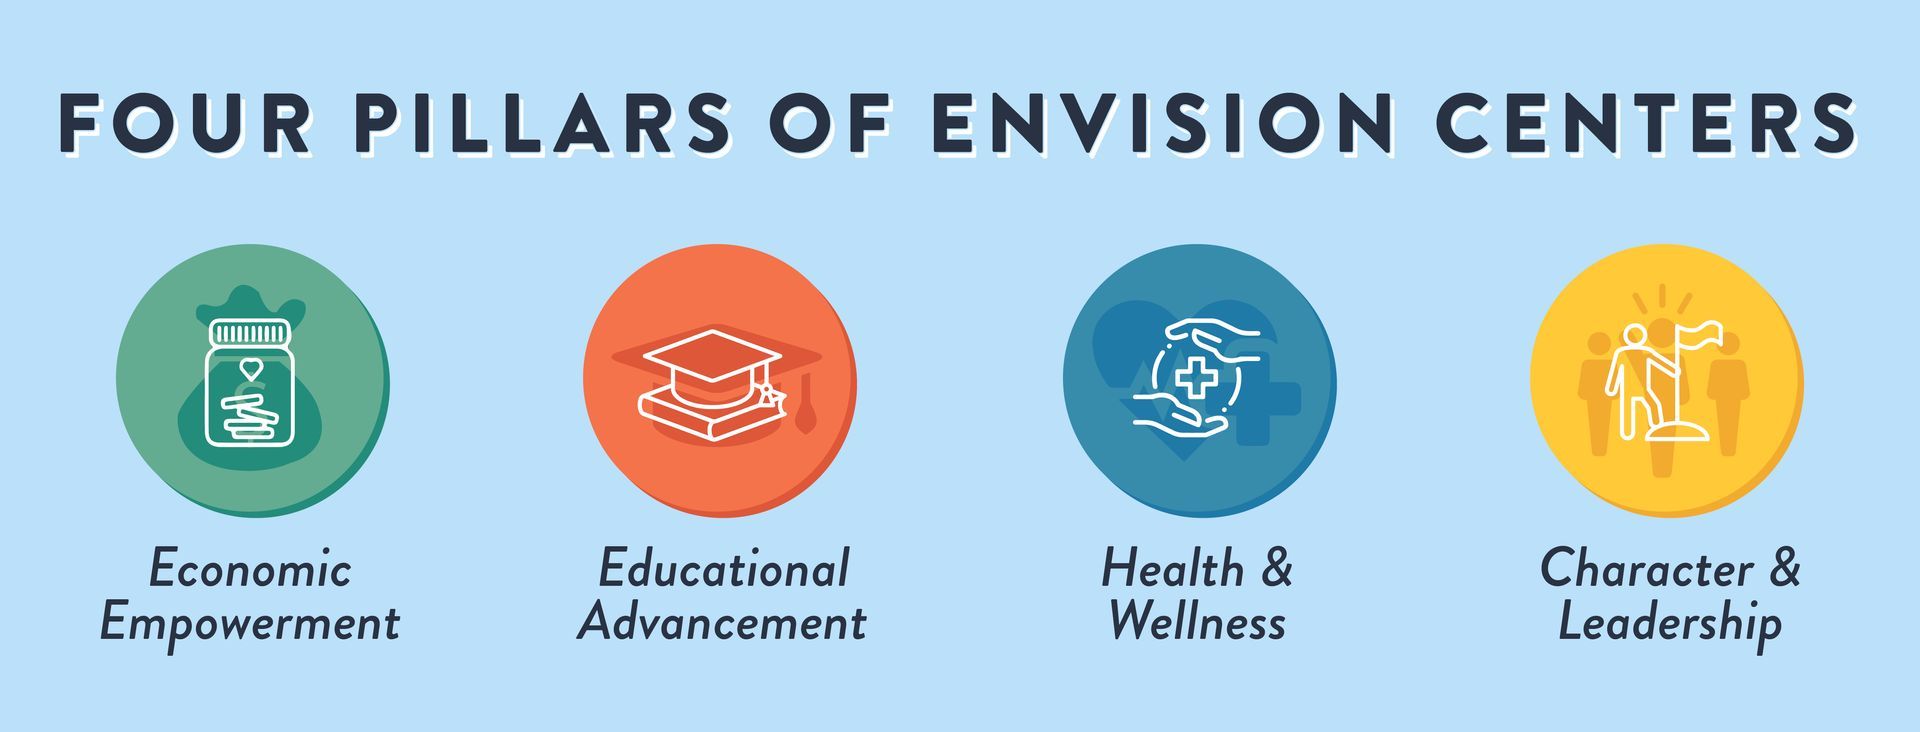 The four pillars of EnVision Centers are Economic Empowerment, Educational Advancement, Health & Wellness, and Character & Leadership